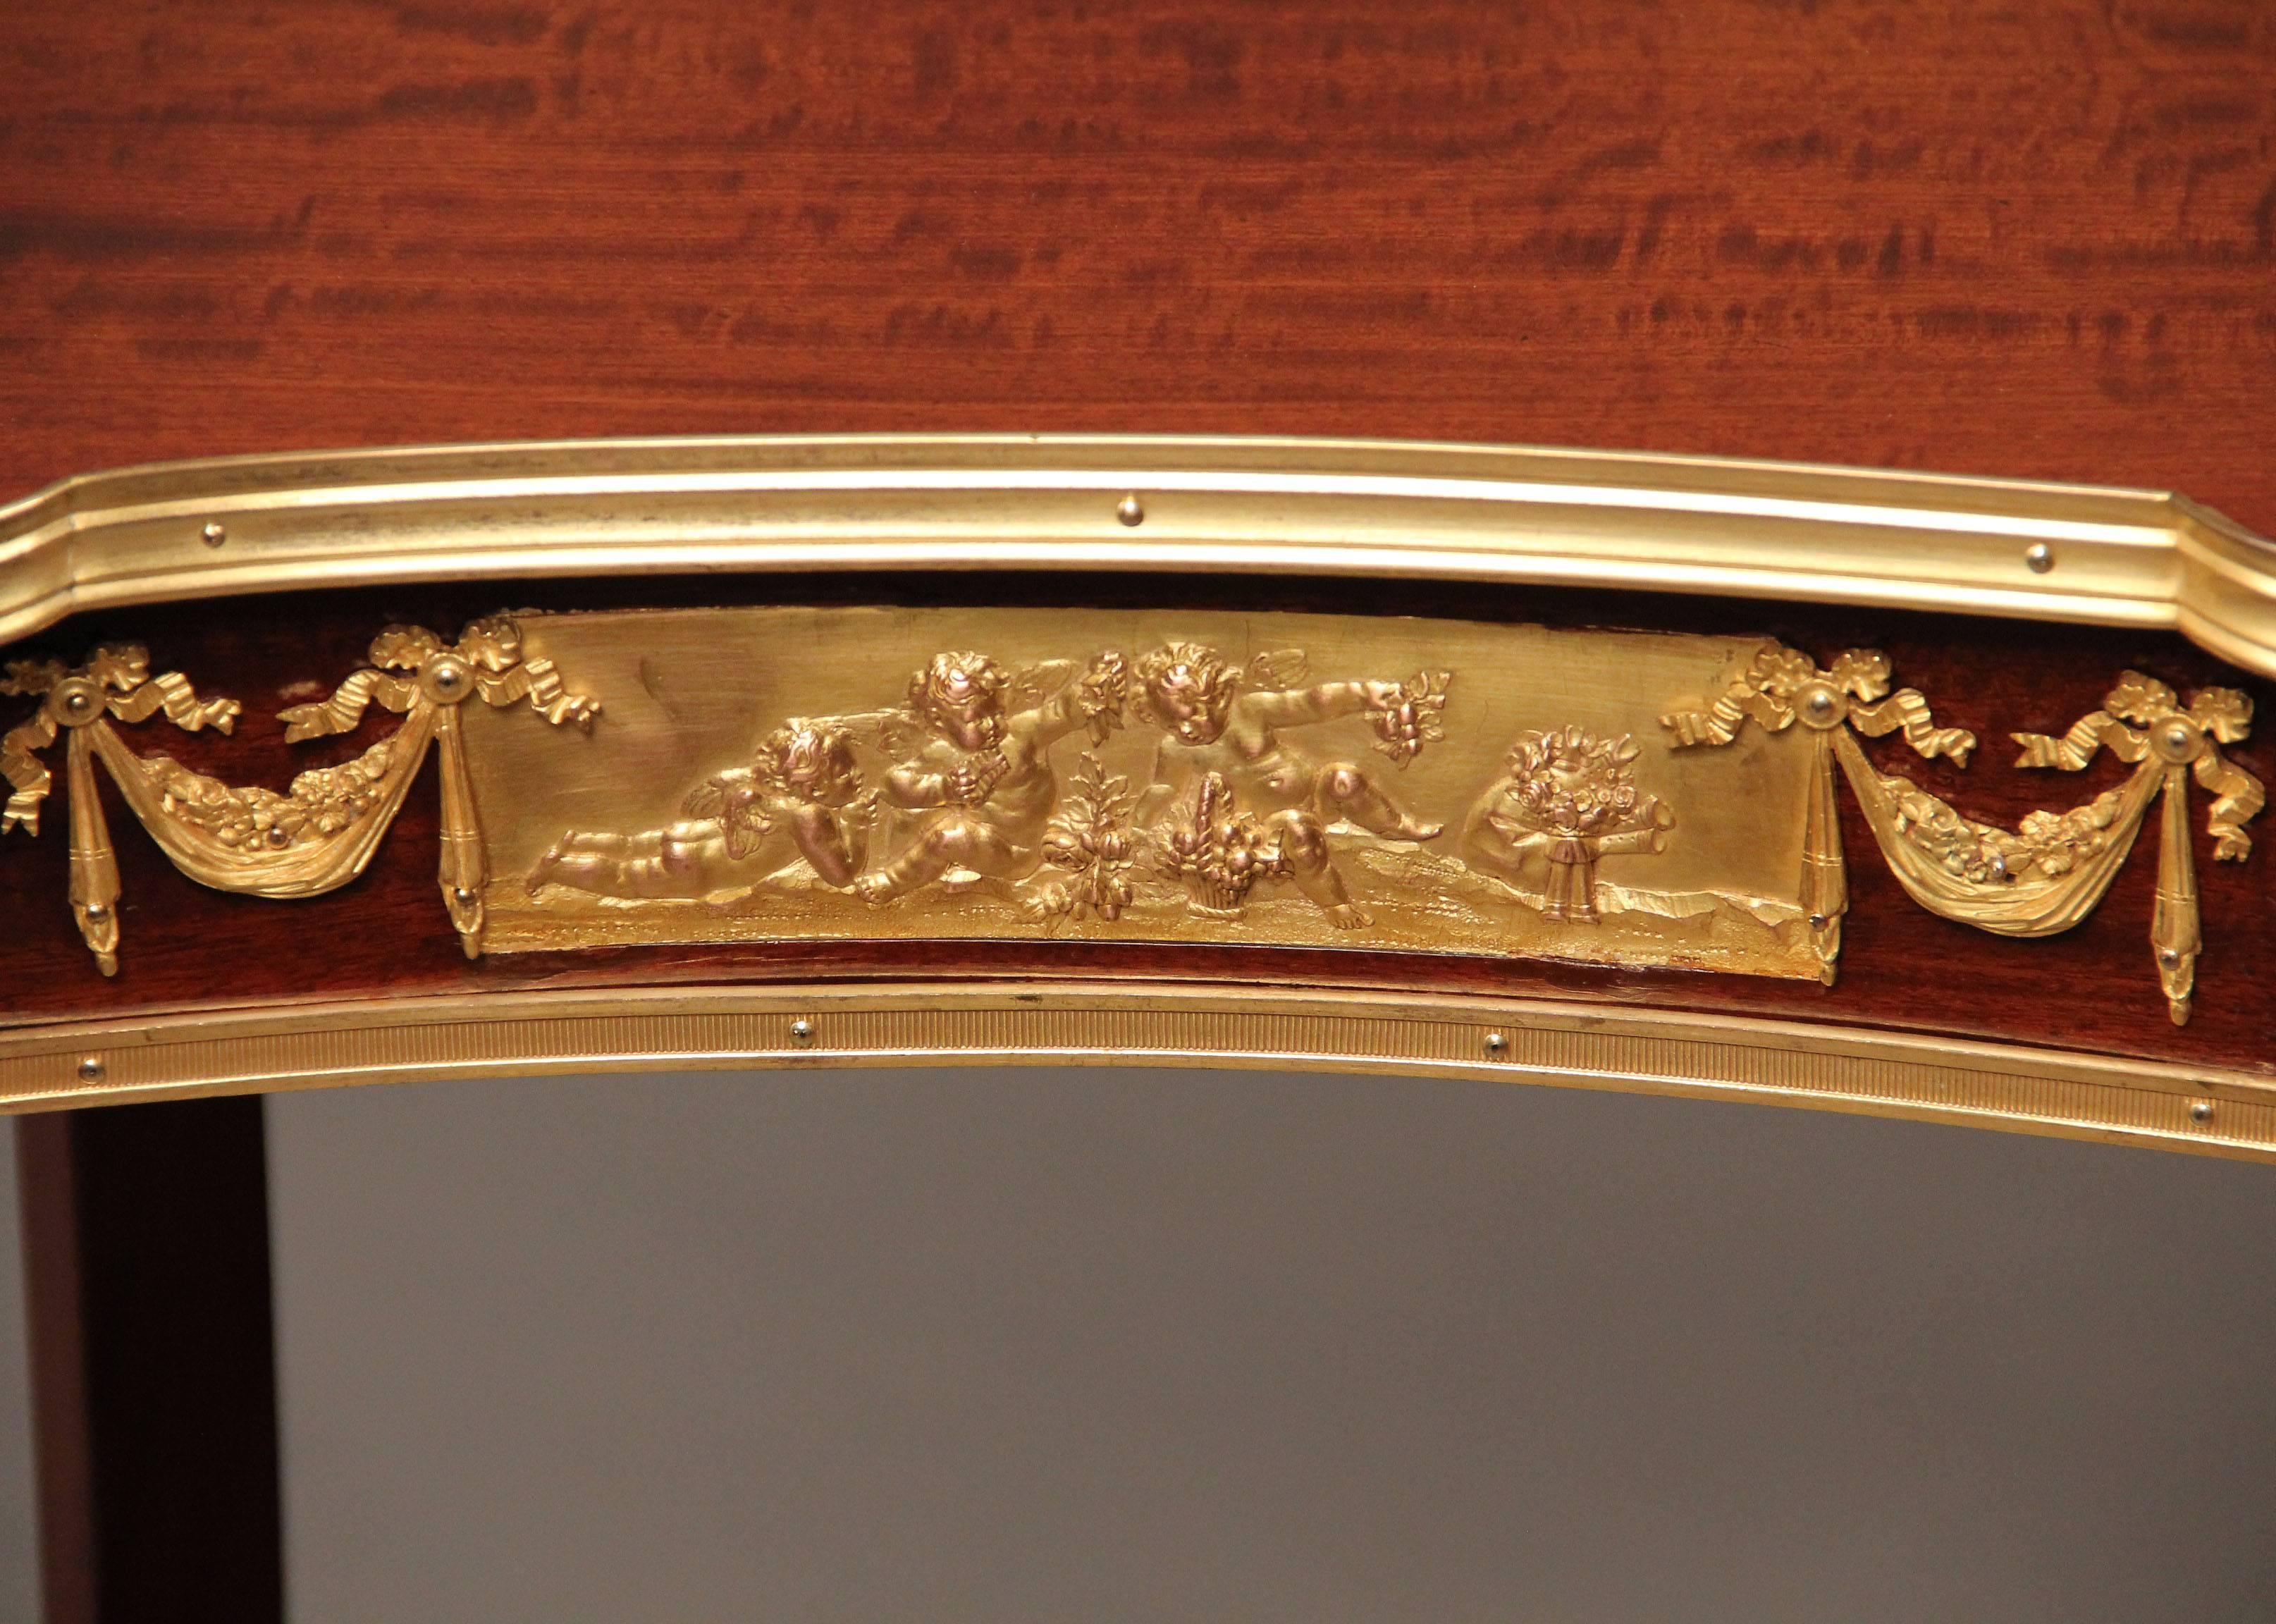 A fine late 19th century Transitional style gilt bronze-mounted kidney shaped table.

The frieze fitted with one drawer, the stretcher with a heart-shaped cast gallery.